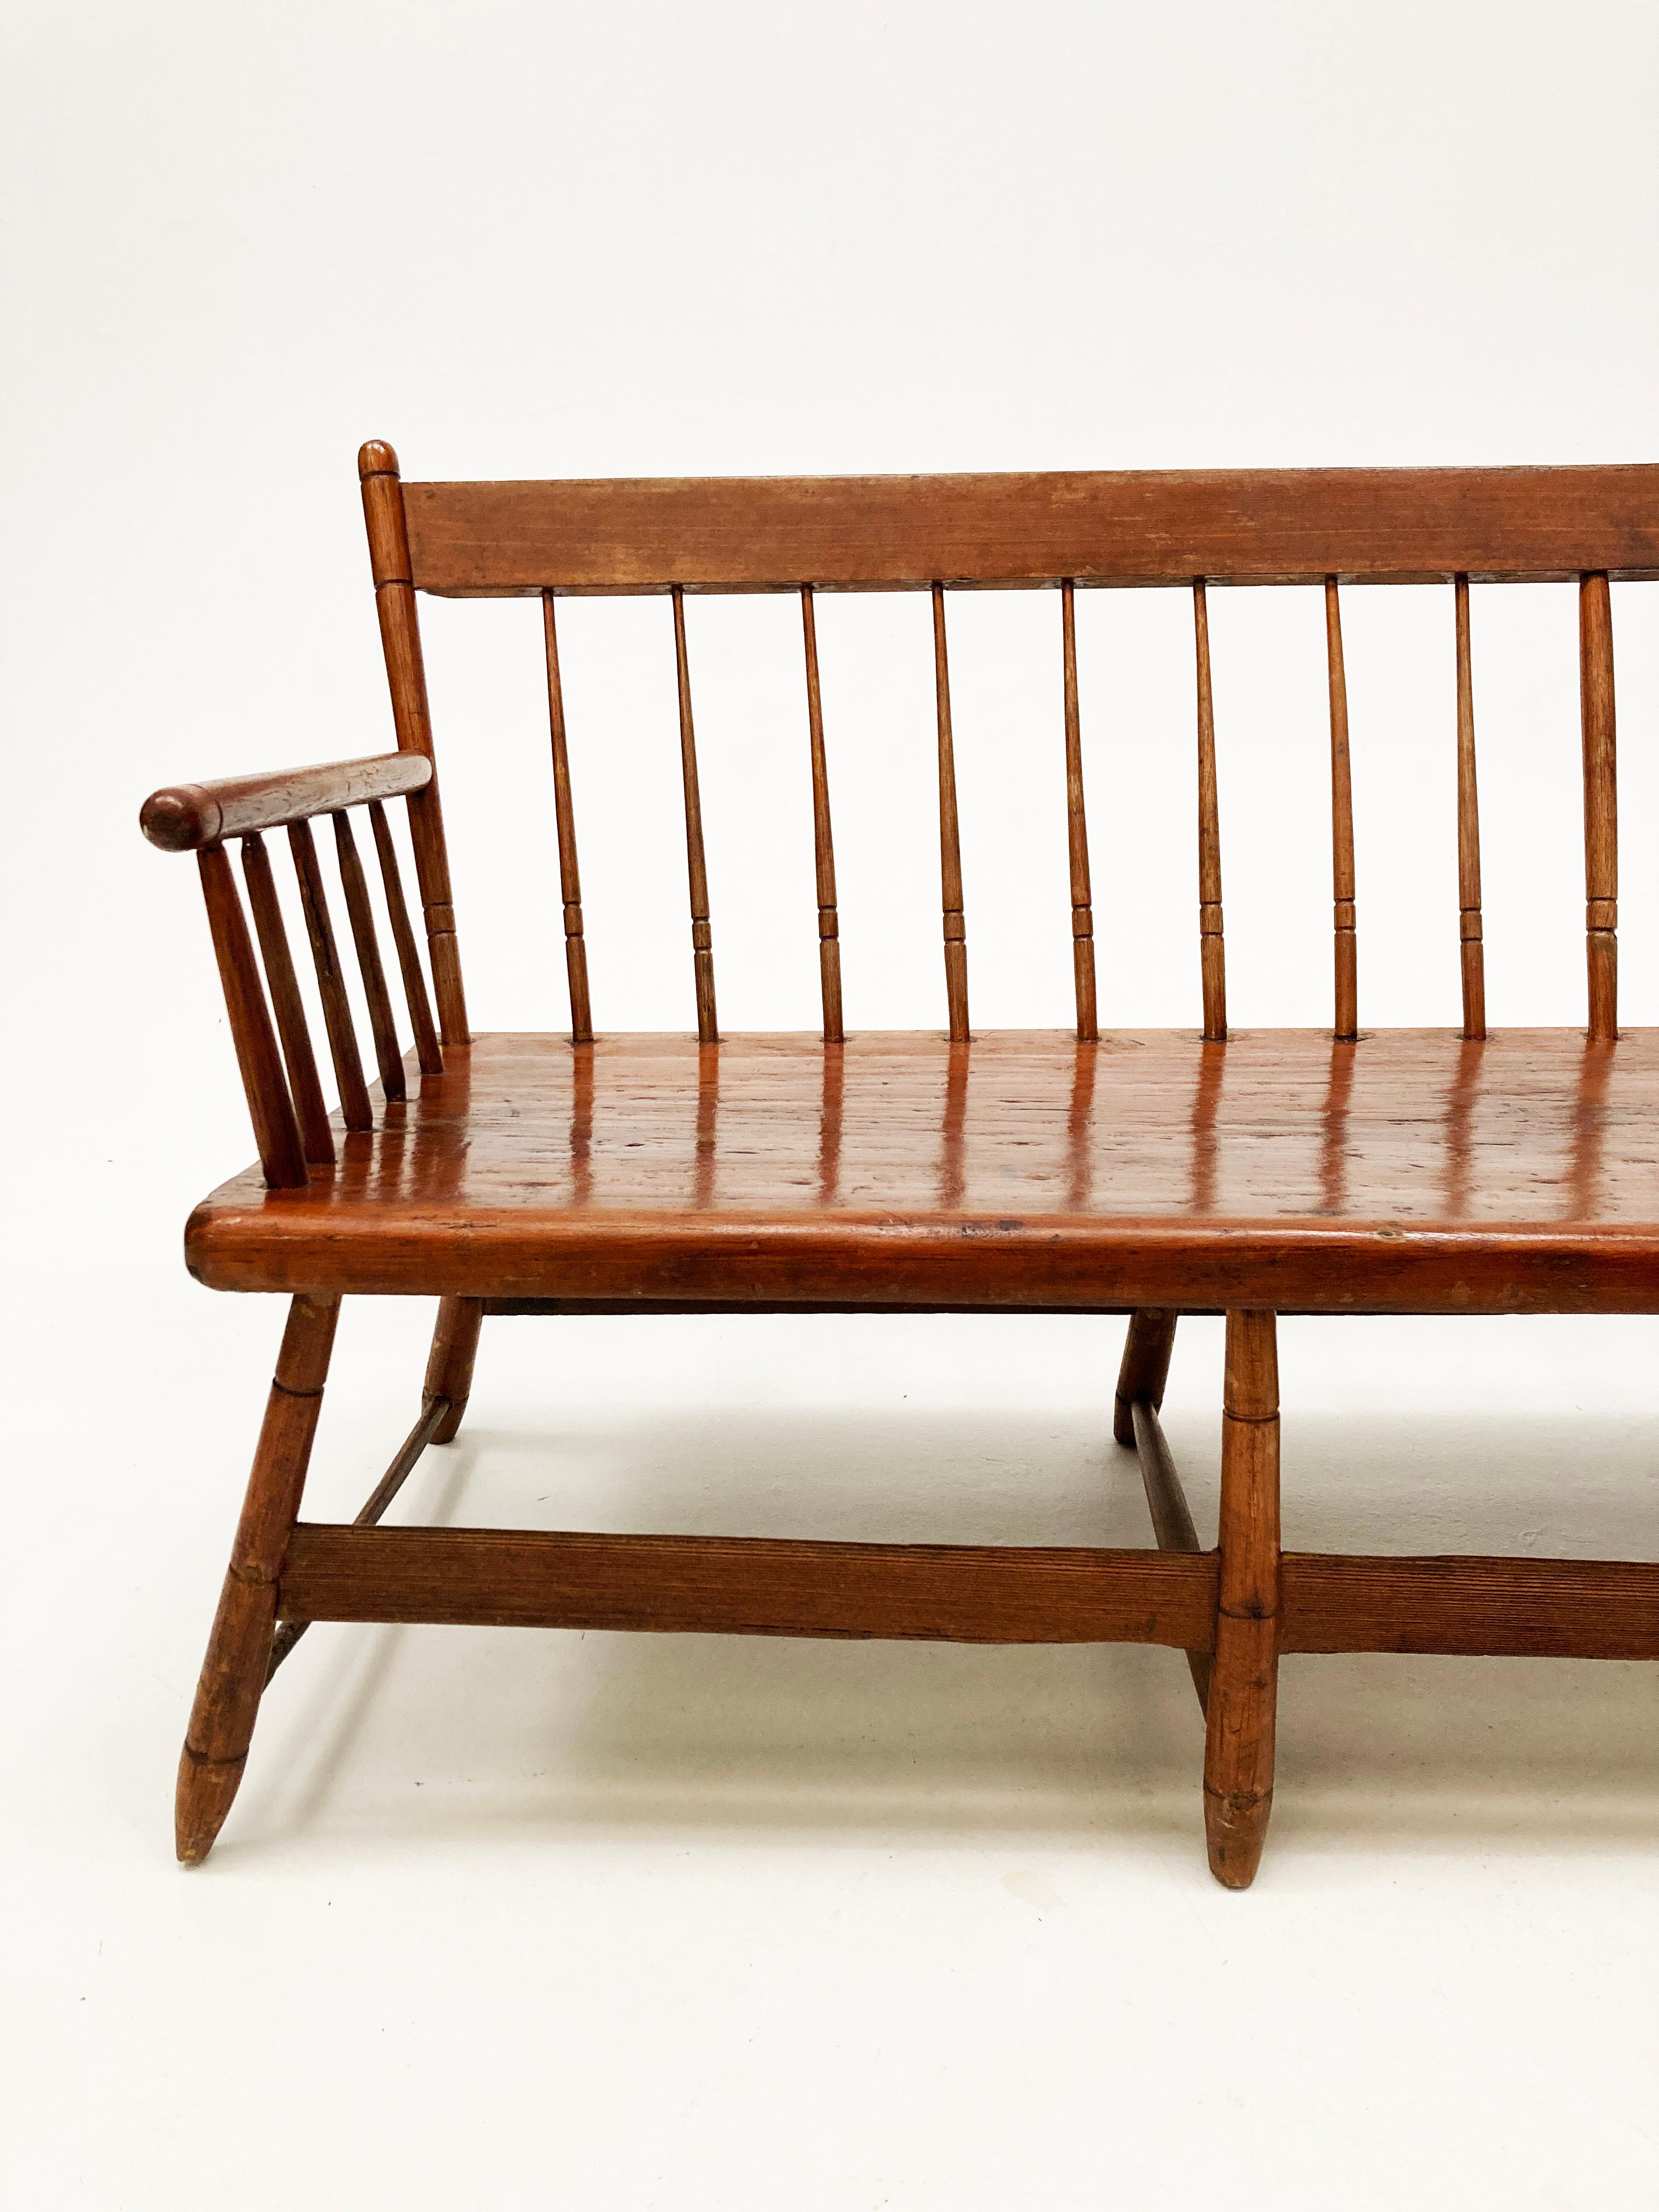 This Early American Windsor Spindle-back Meeting House Bench is made from very old hand hewn pine planks and is an amazing antique work of artisanship from this early era. Primitively made, this meeting house bench would have seen many town